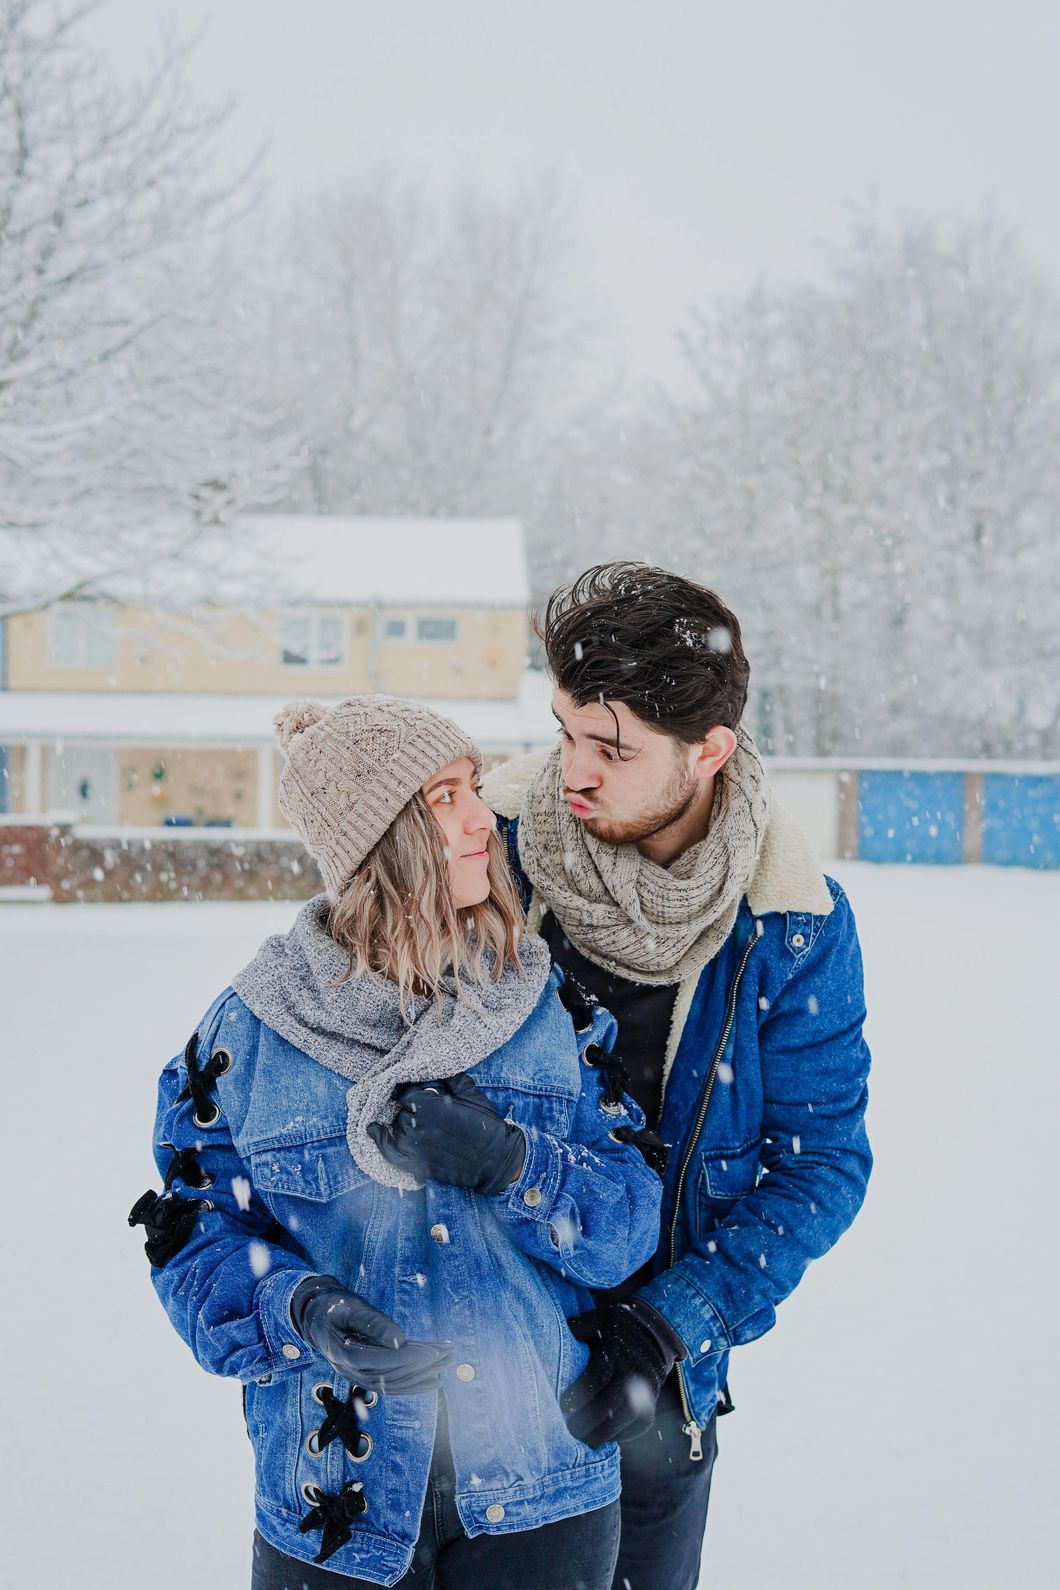 11 Winter Dates That Will Totally 'Sleigh' While Still Social Distancing